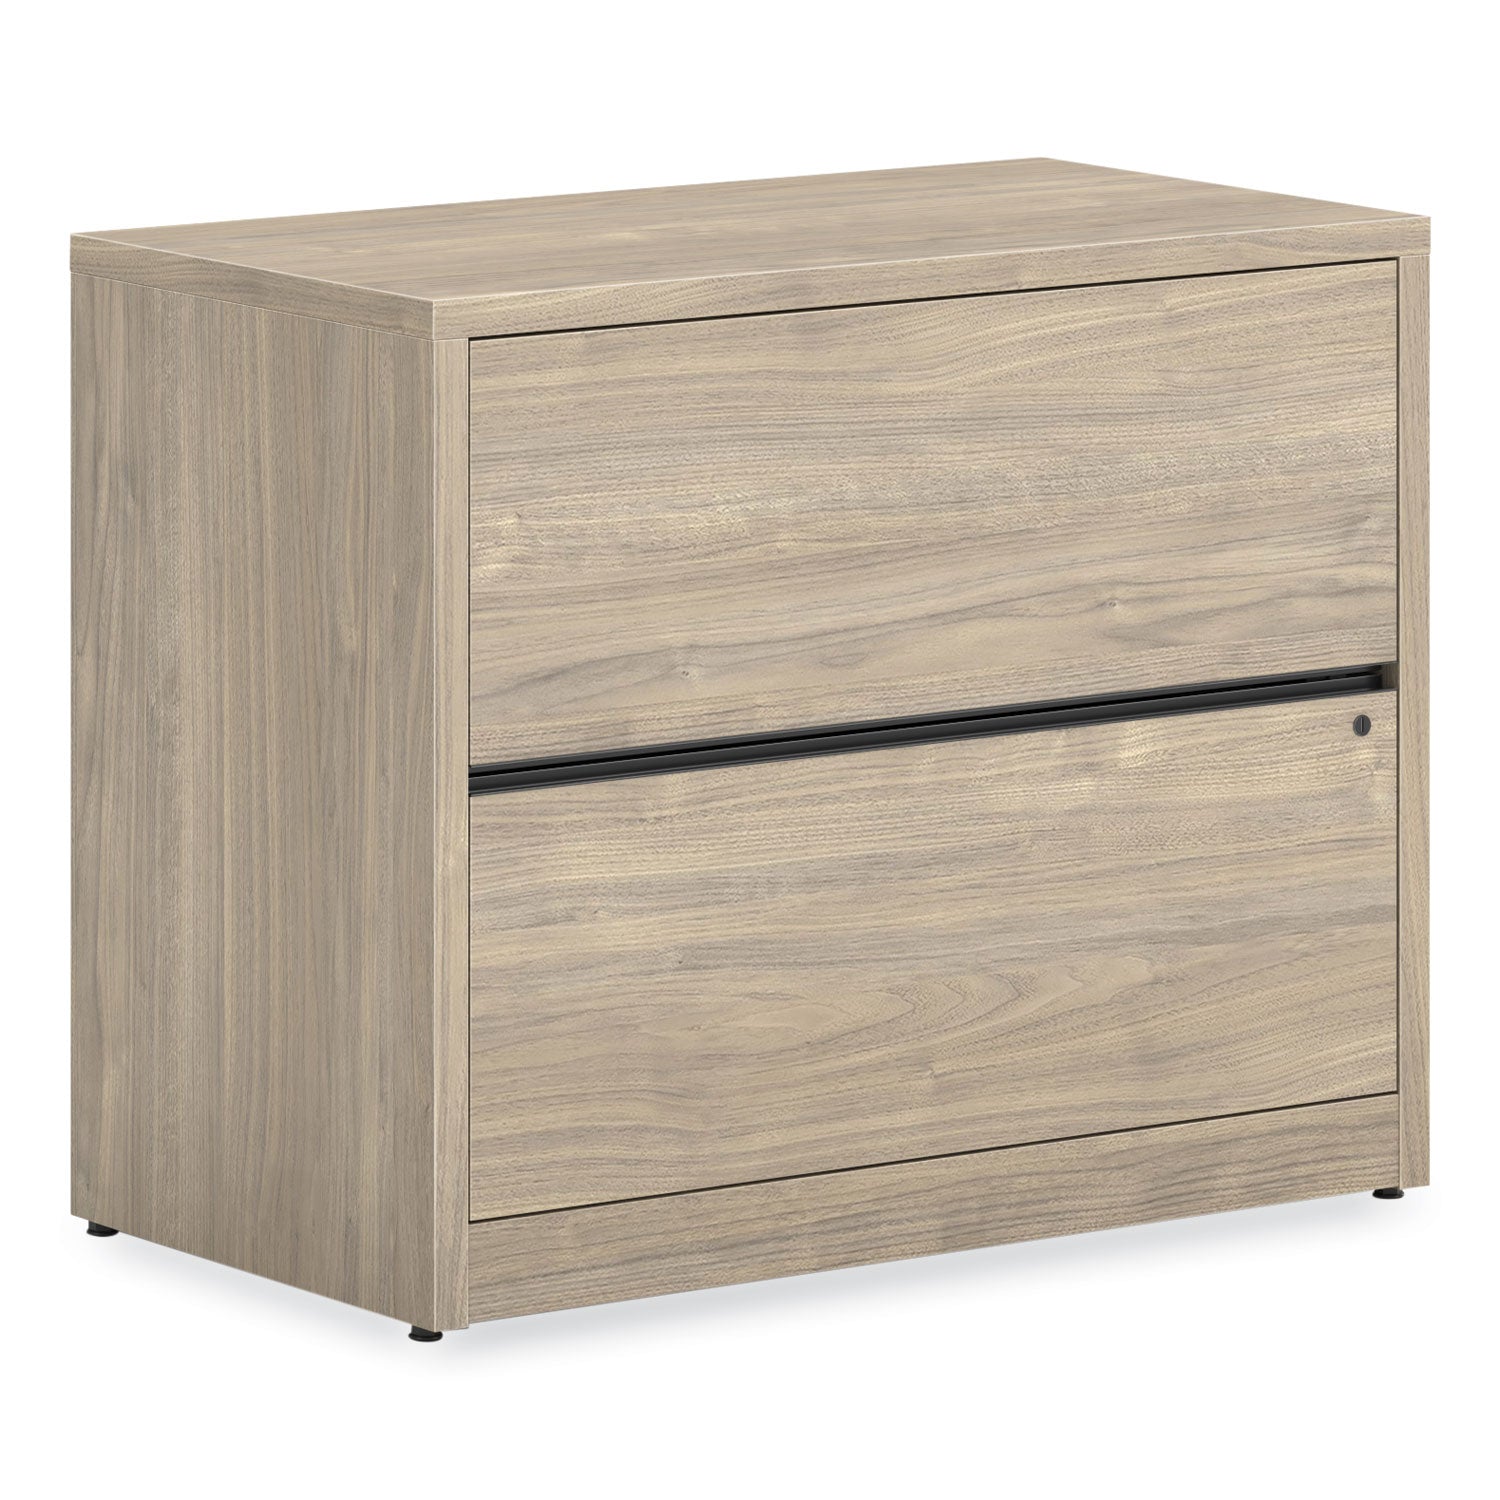 10500-series-lateral-file-2-legal-letter-size-file-drawers-kingswood-walnut-36-x-20-x-295_hon10563lki1 - 1